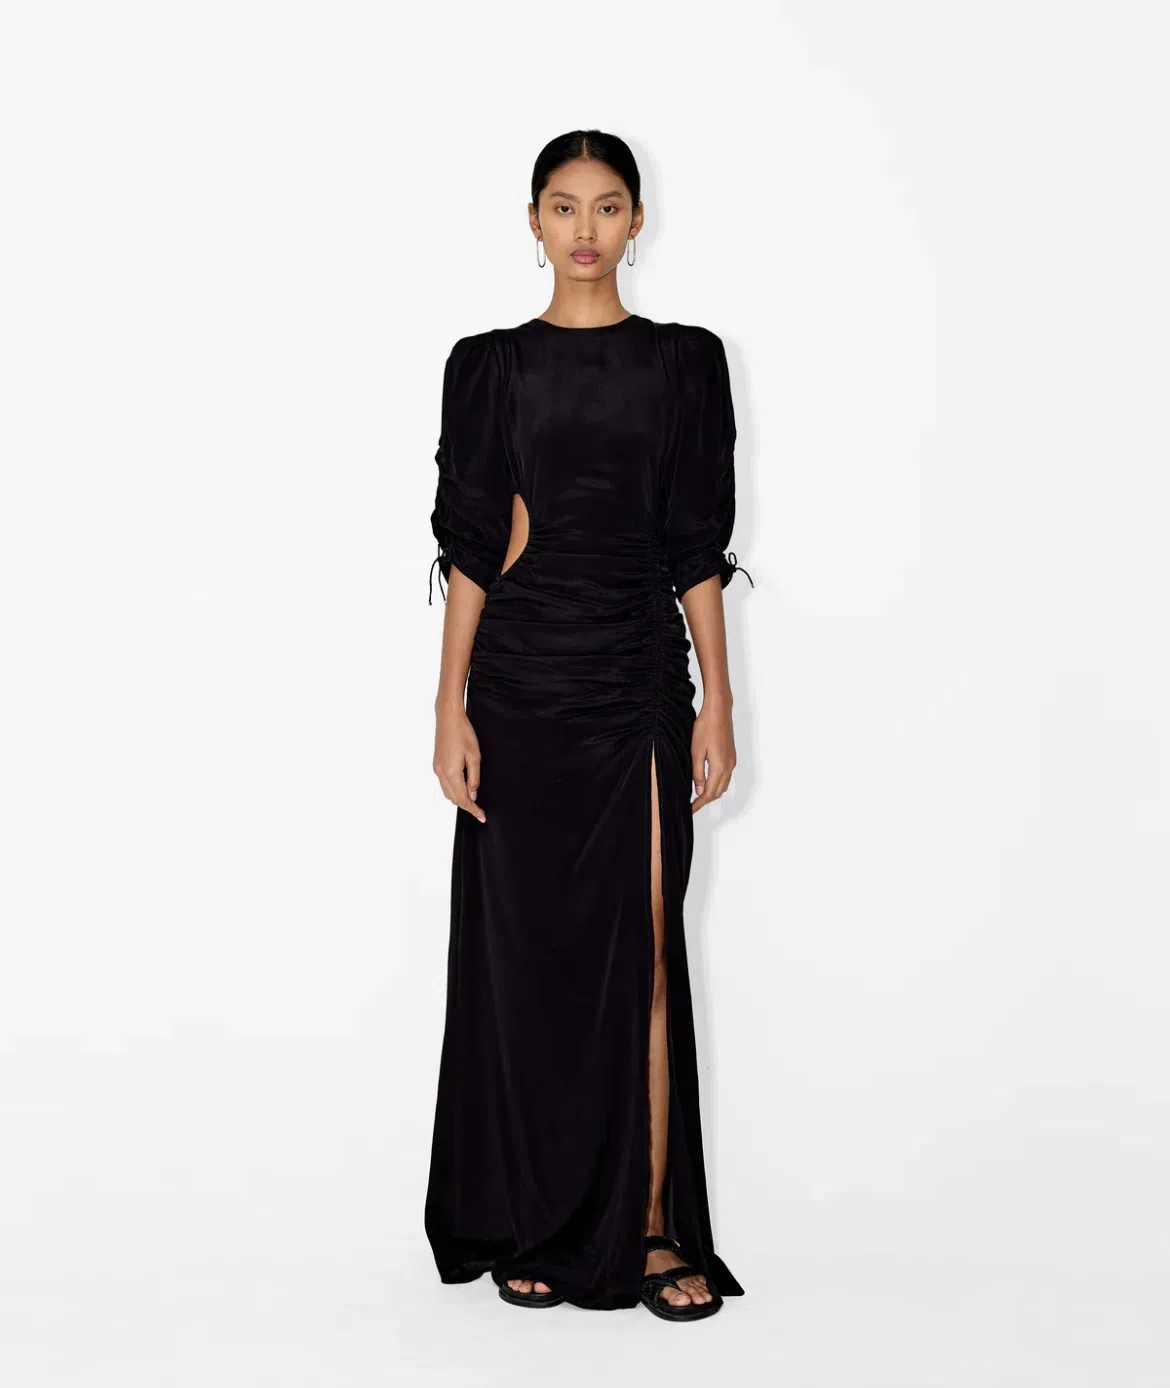 Magali Pascal Honore Dress Black Size 8 | The Volte